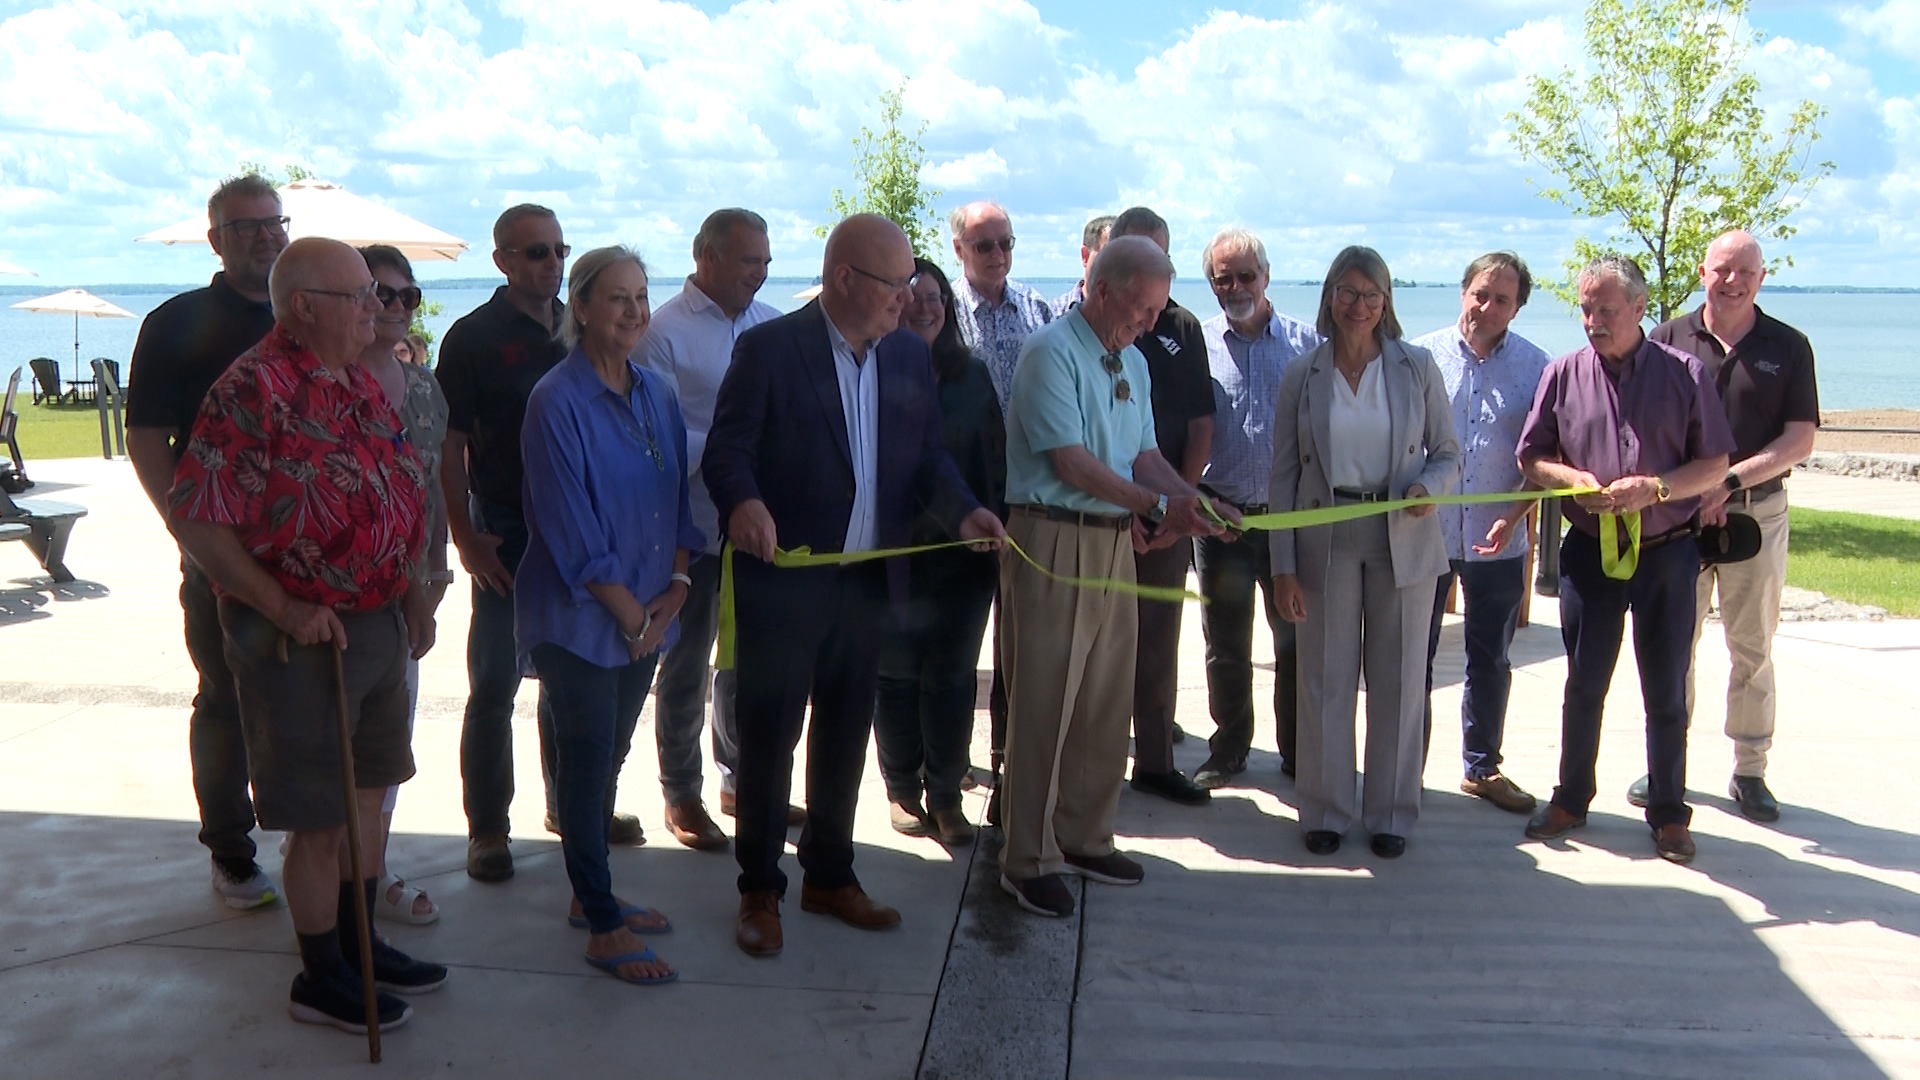 Brown’s Bay Beach near Brockville, Ont. reopens after $5M facelift